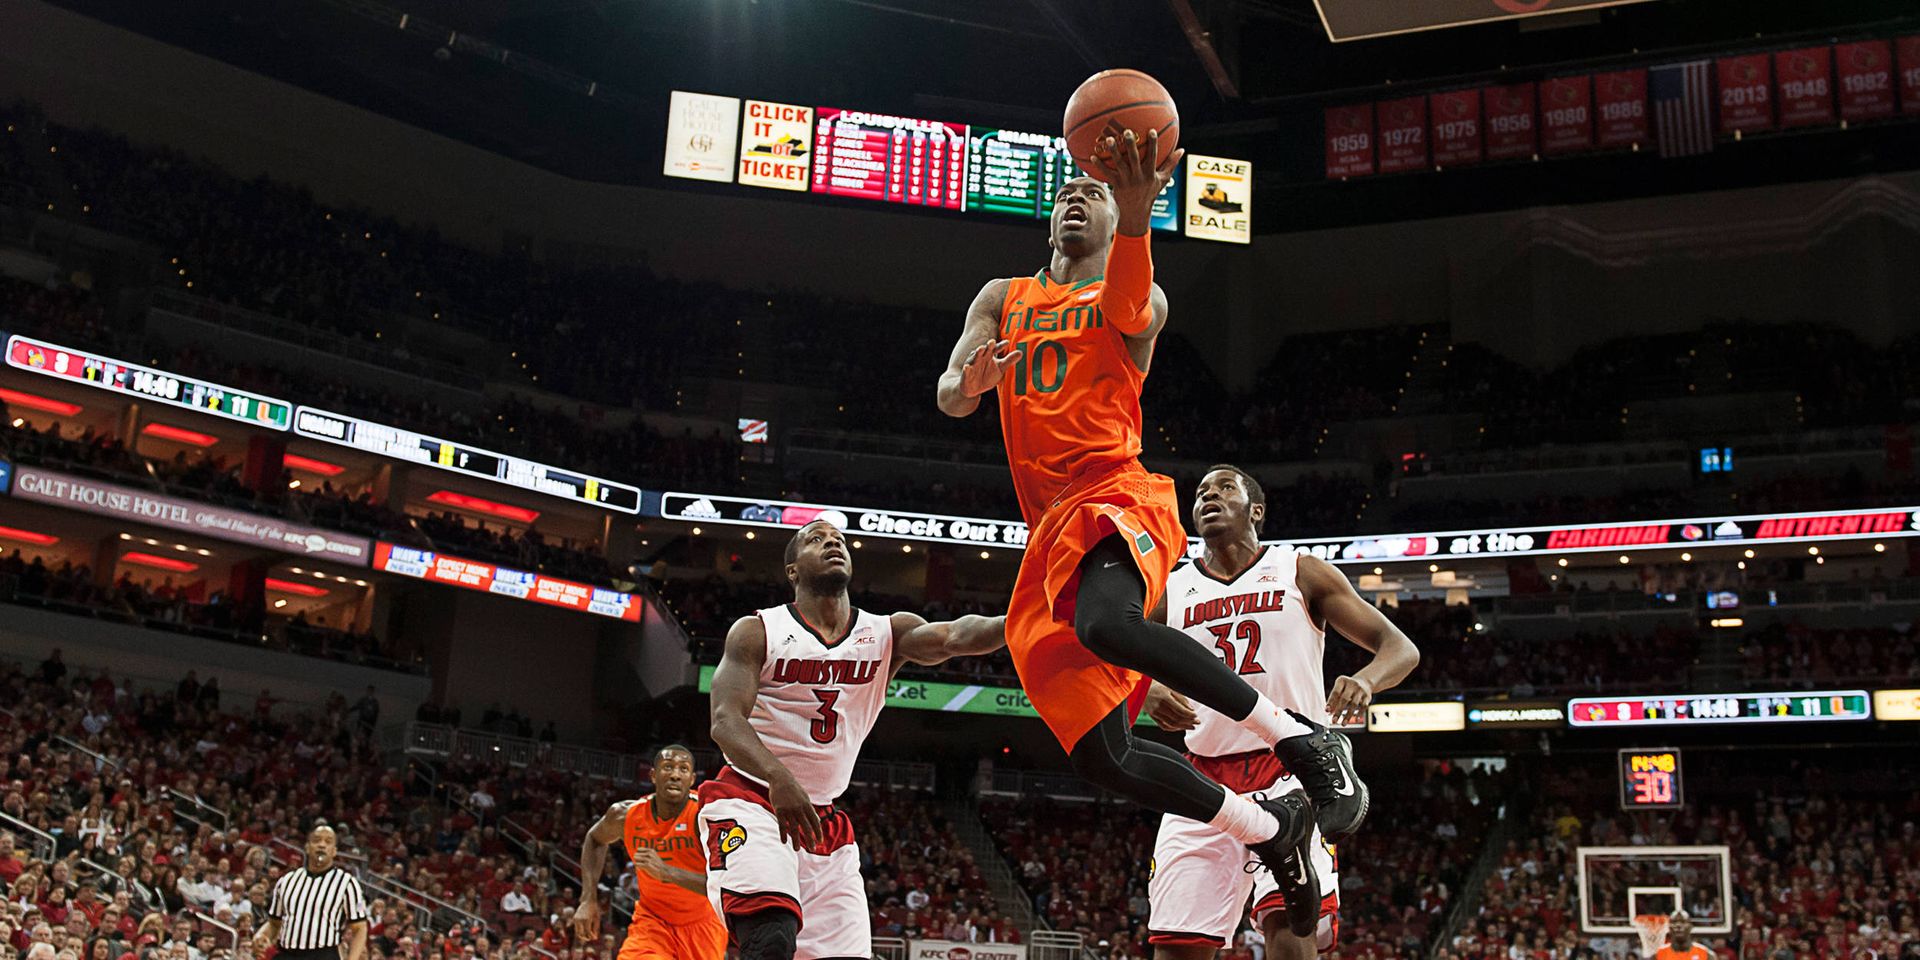 @CanesHoops Falls At Louisville, 55-53